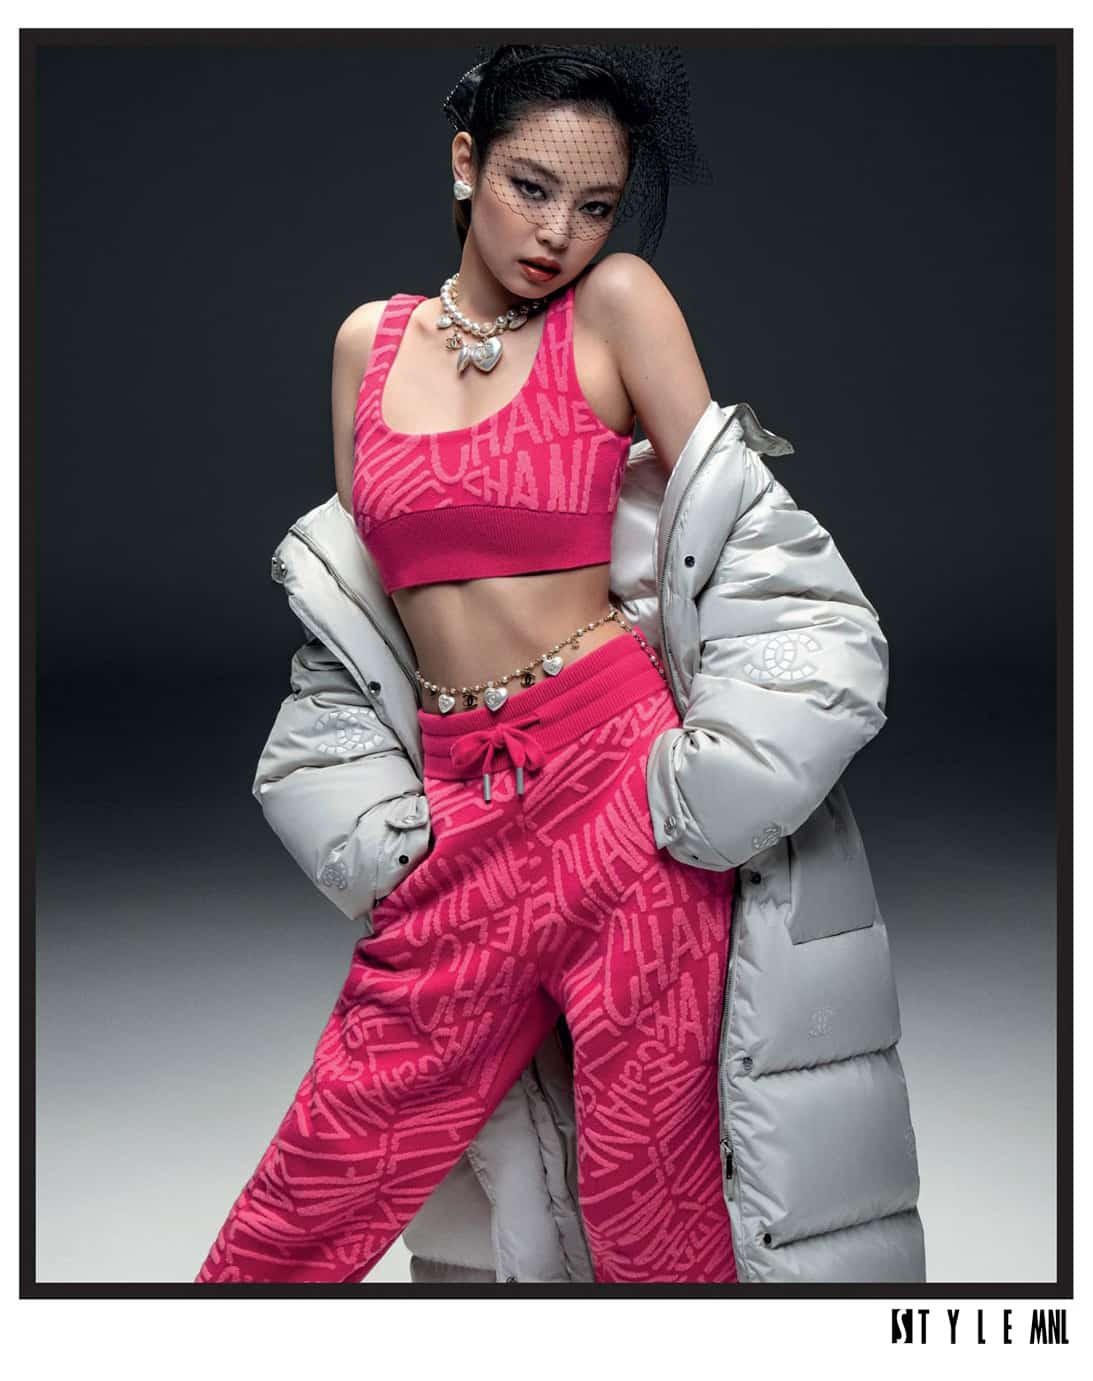 HERE ARE THE CAMPAIGN PHOTOS FOR COCO NEIGE FEATURING BLACKPINK'S JENNIE